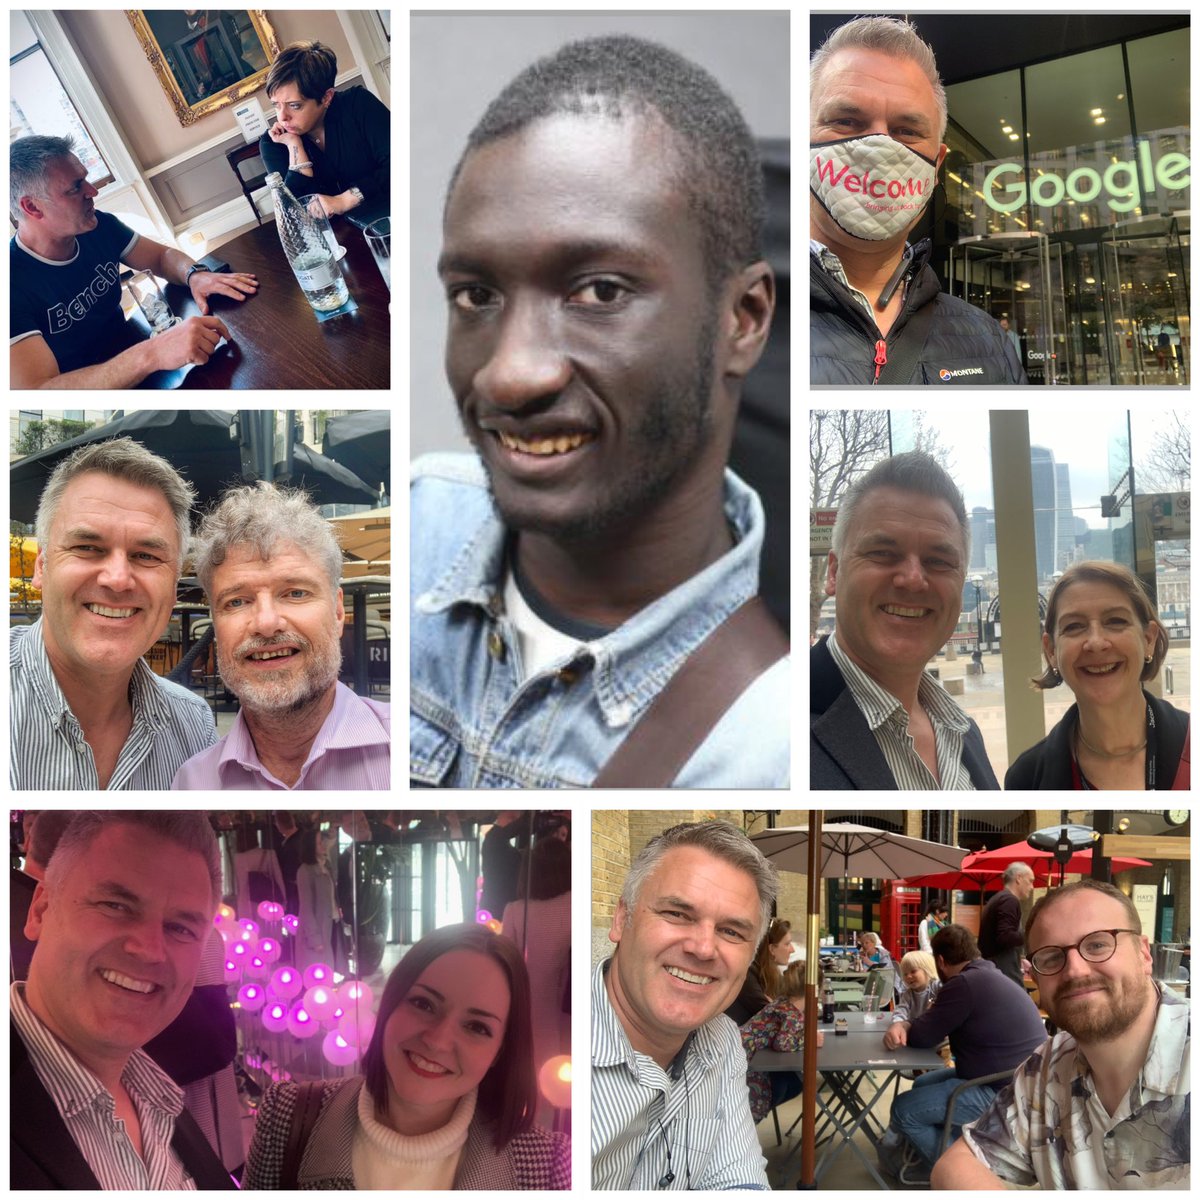 My #DisabilityAdvocacy rock star tour of #London meeting Victoria @UnhiddenFashion, @ghjconsultant @CarpenterKate @JacobsConnects @SaraFlay & Leighton @LegacyITC, the unique @imisaacharvey AND top bloke Mike Adams of @wearepurpleorg. This would be the best tour T-shirt ever 🤘🎸